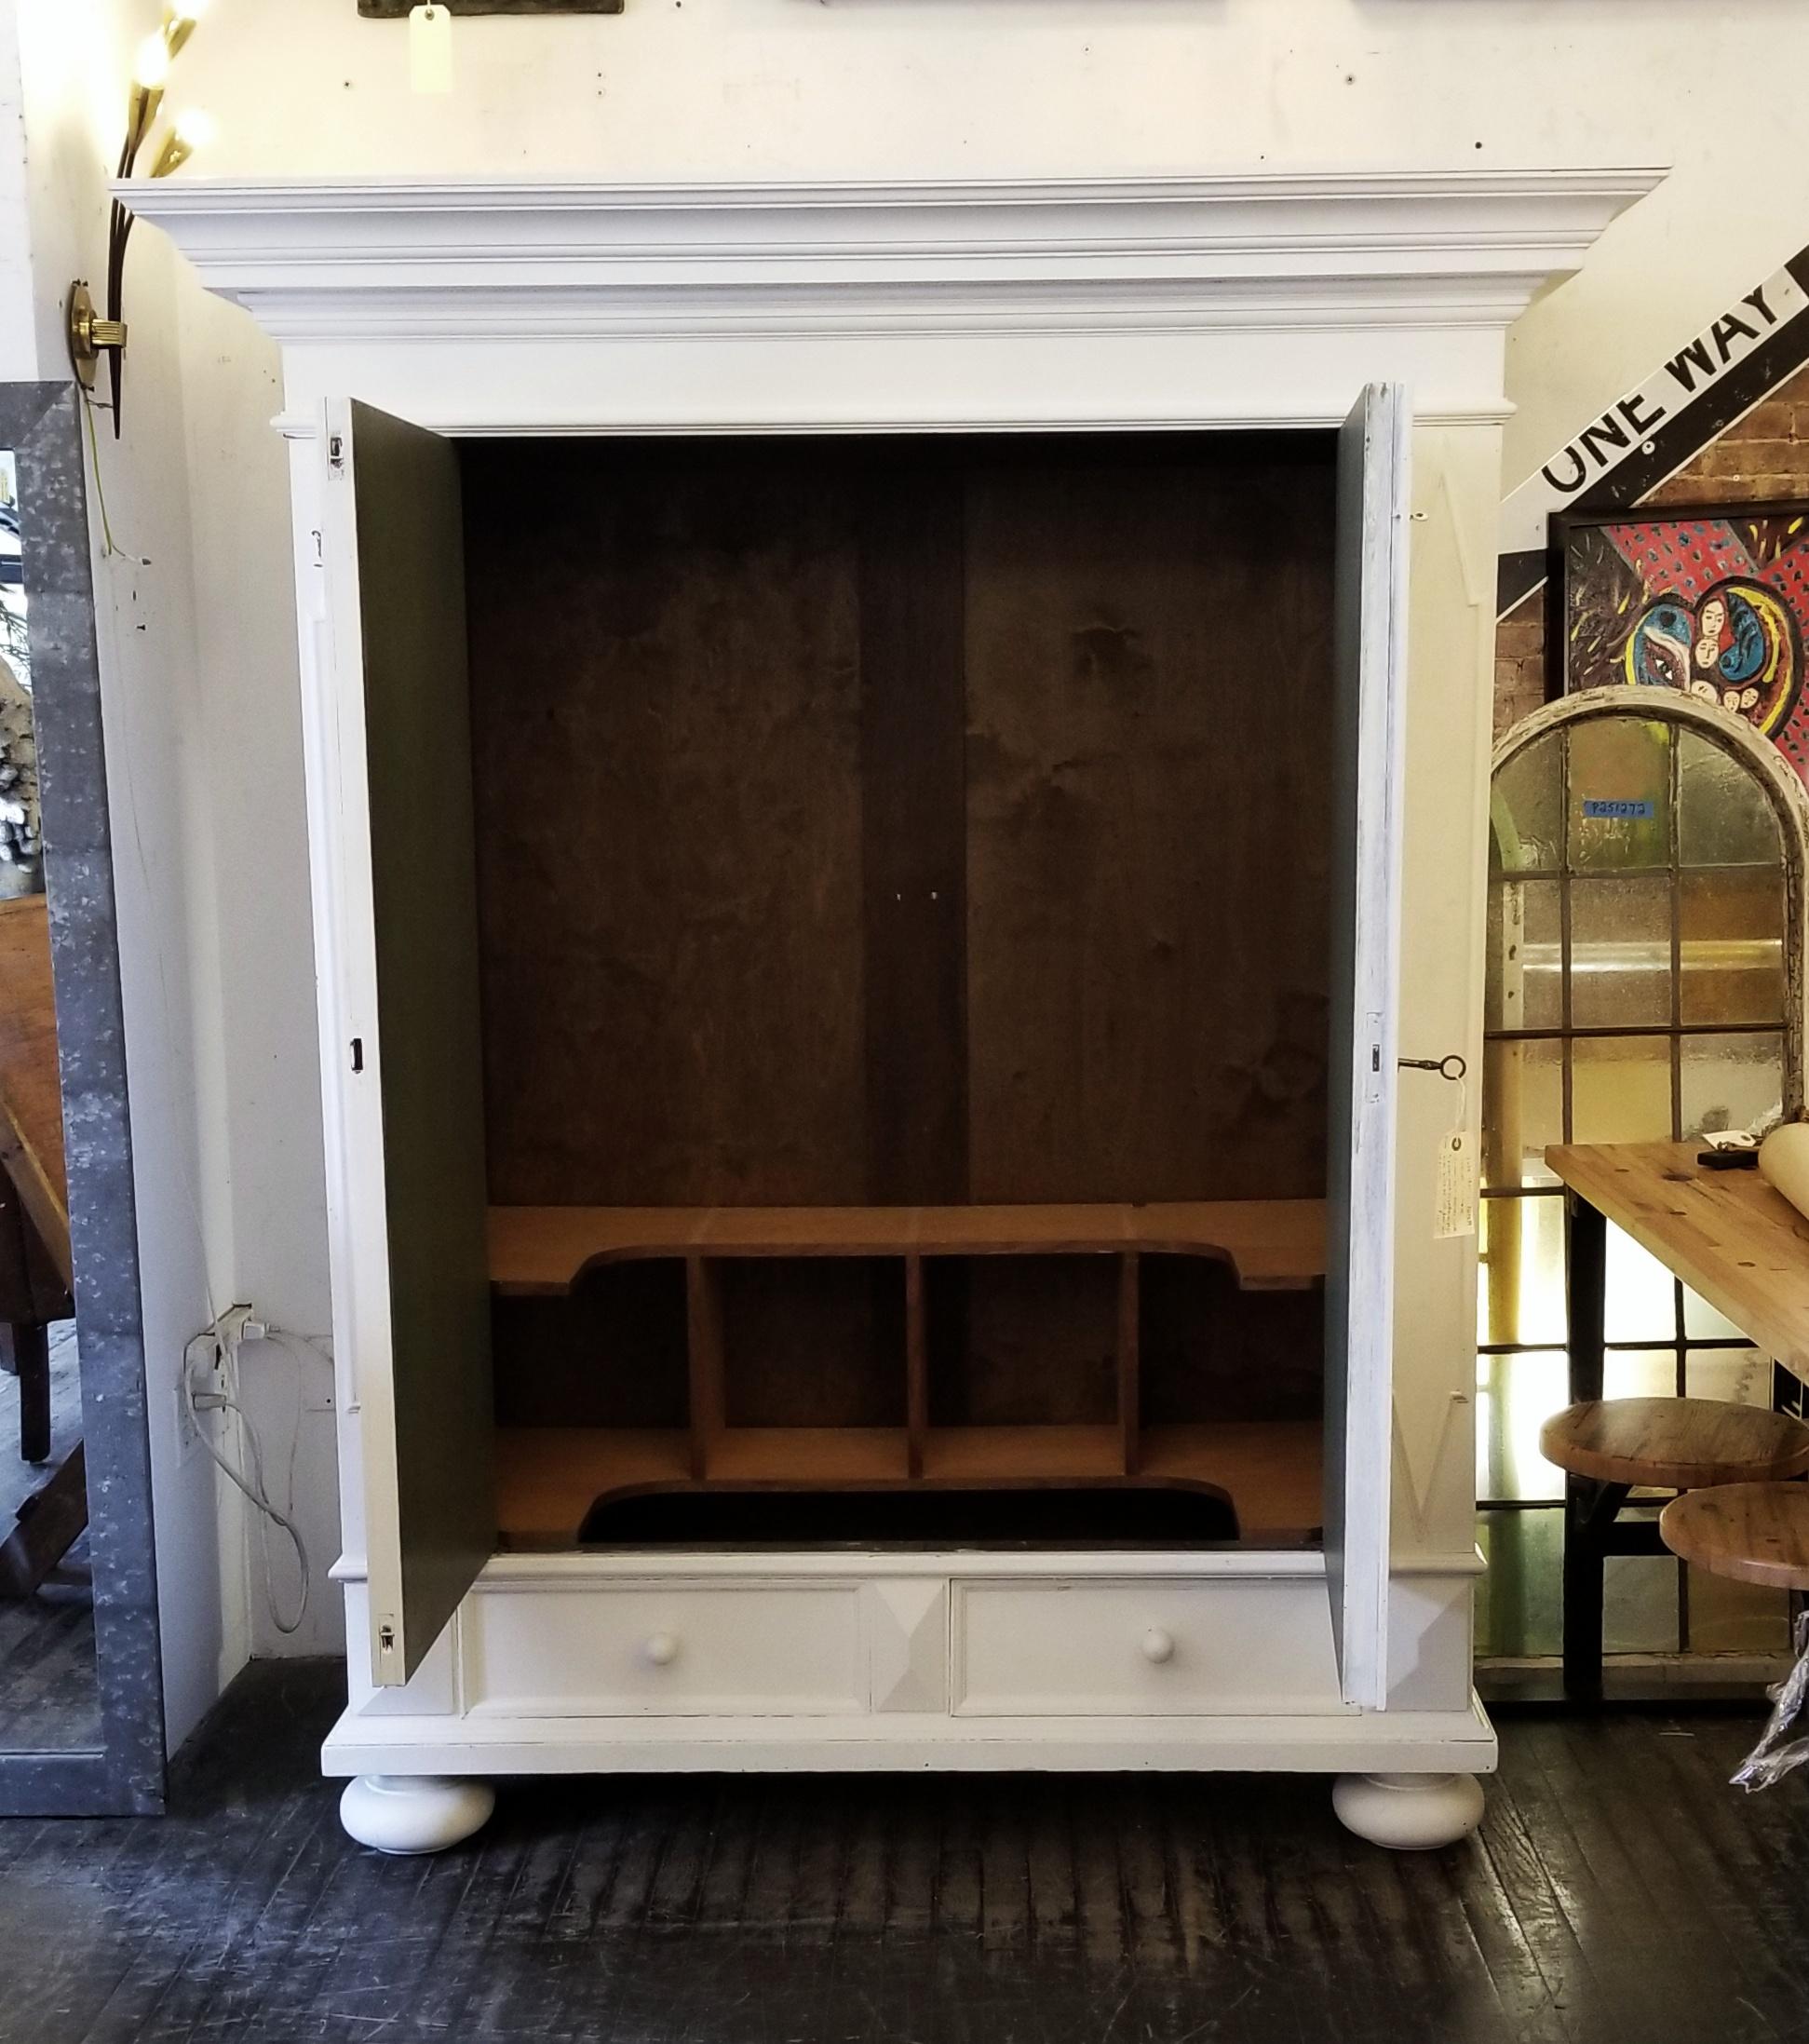 This is a beautifully restored roomy late 1800s armoire cabinet that has been painted white on the outside. Custom built shelves have been added towards the bottom of the cabinet. The clothing bar is missing, but the holes are there to add one. The